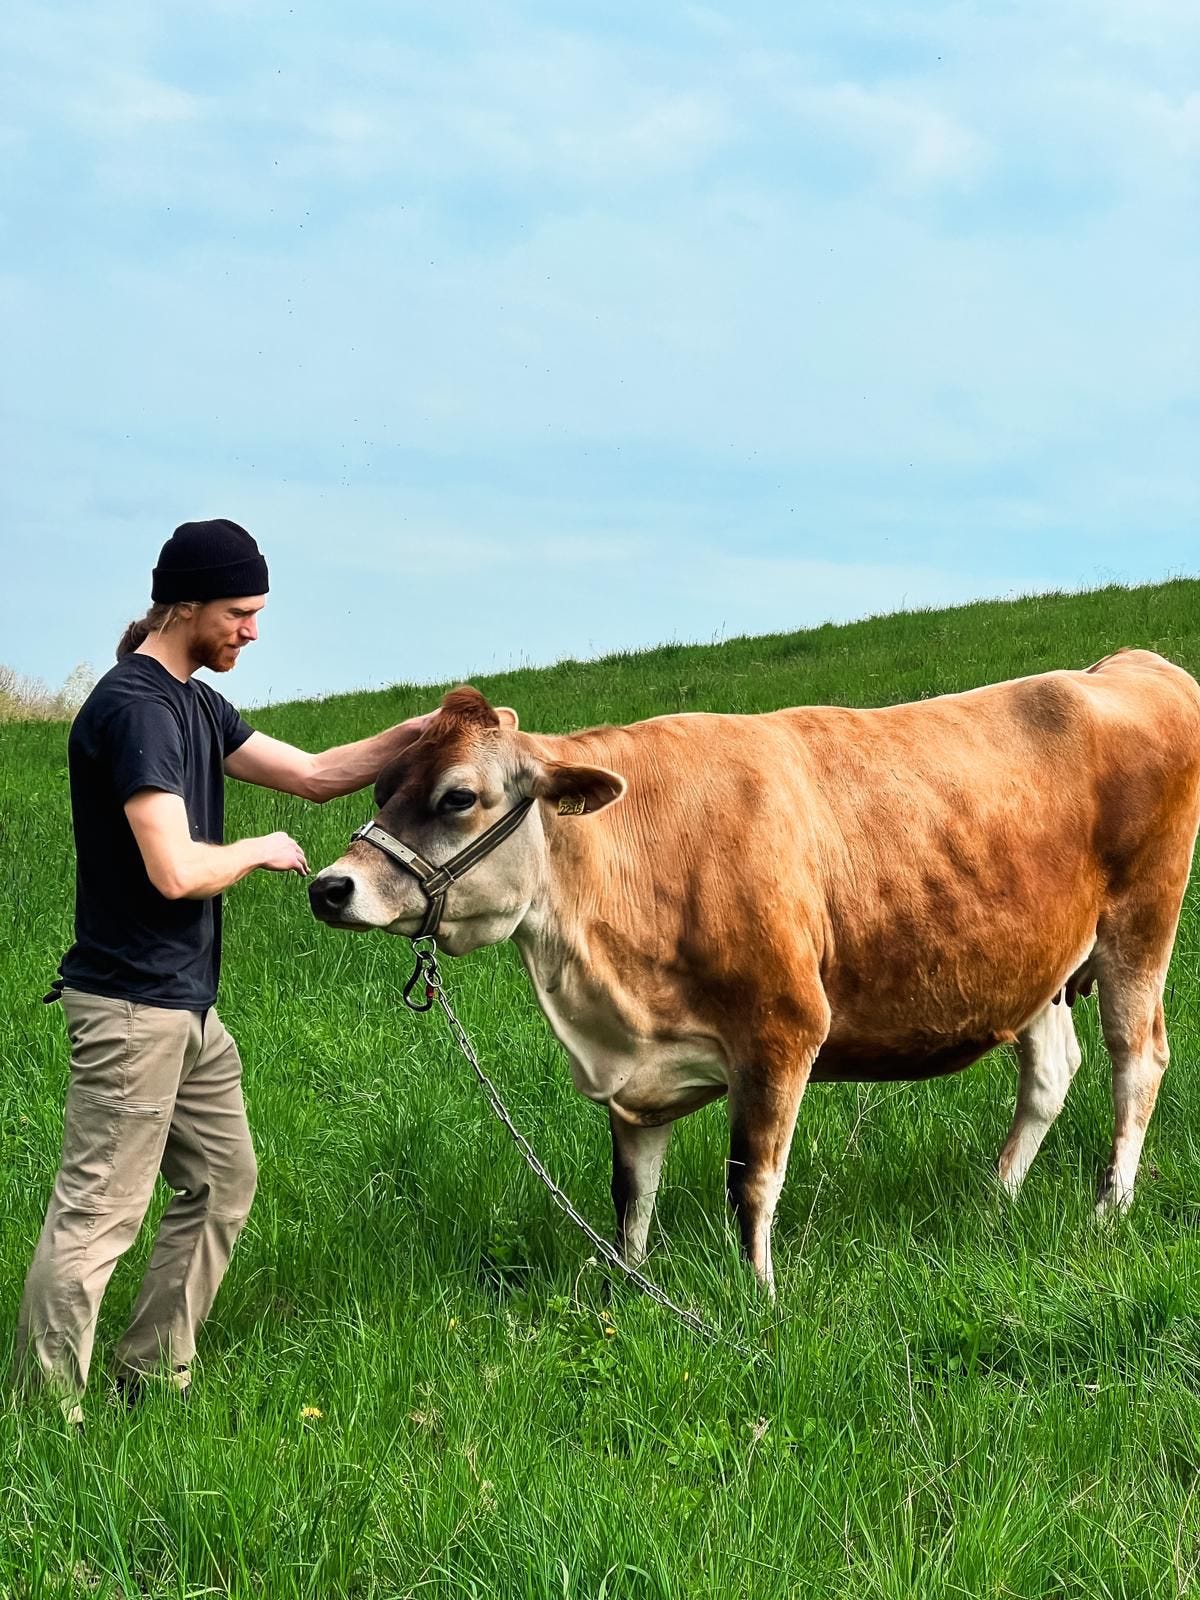 Man petting a beautiful golden brown cow on a green pasture with a blue sky